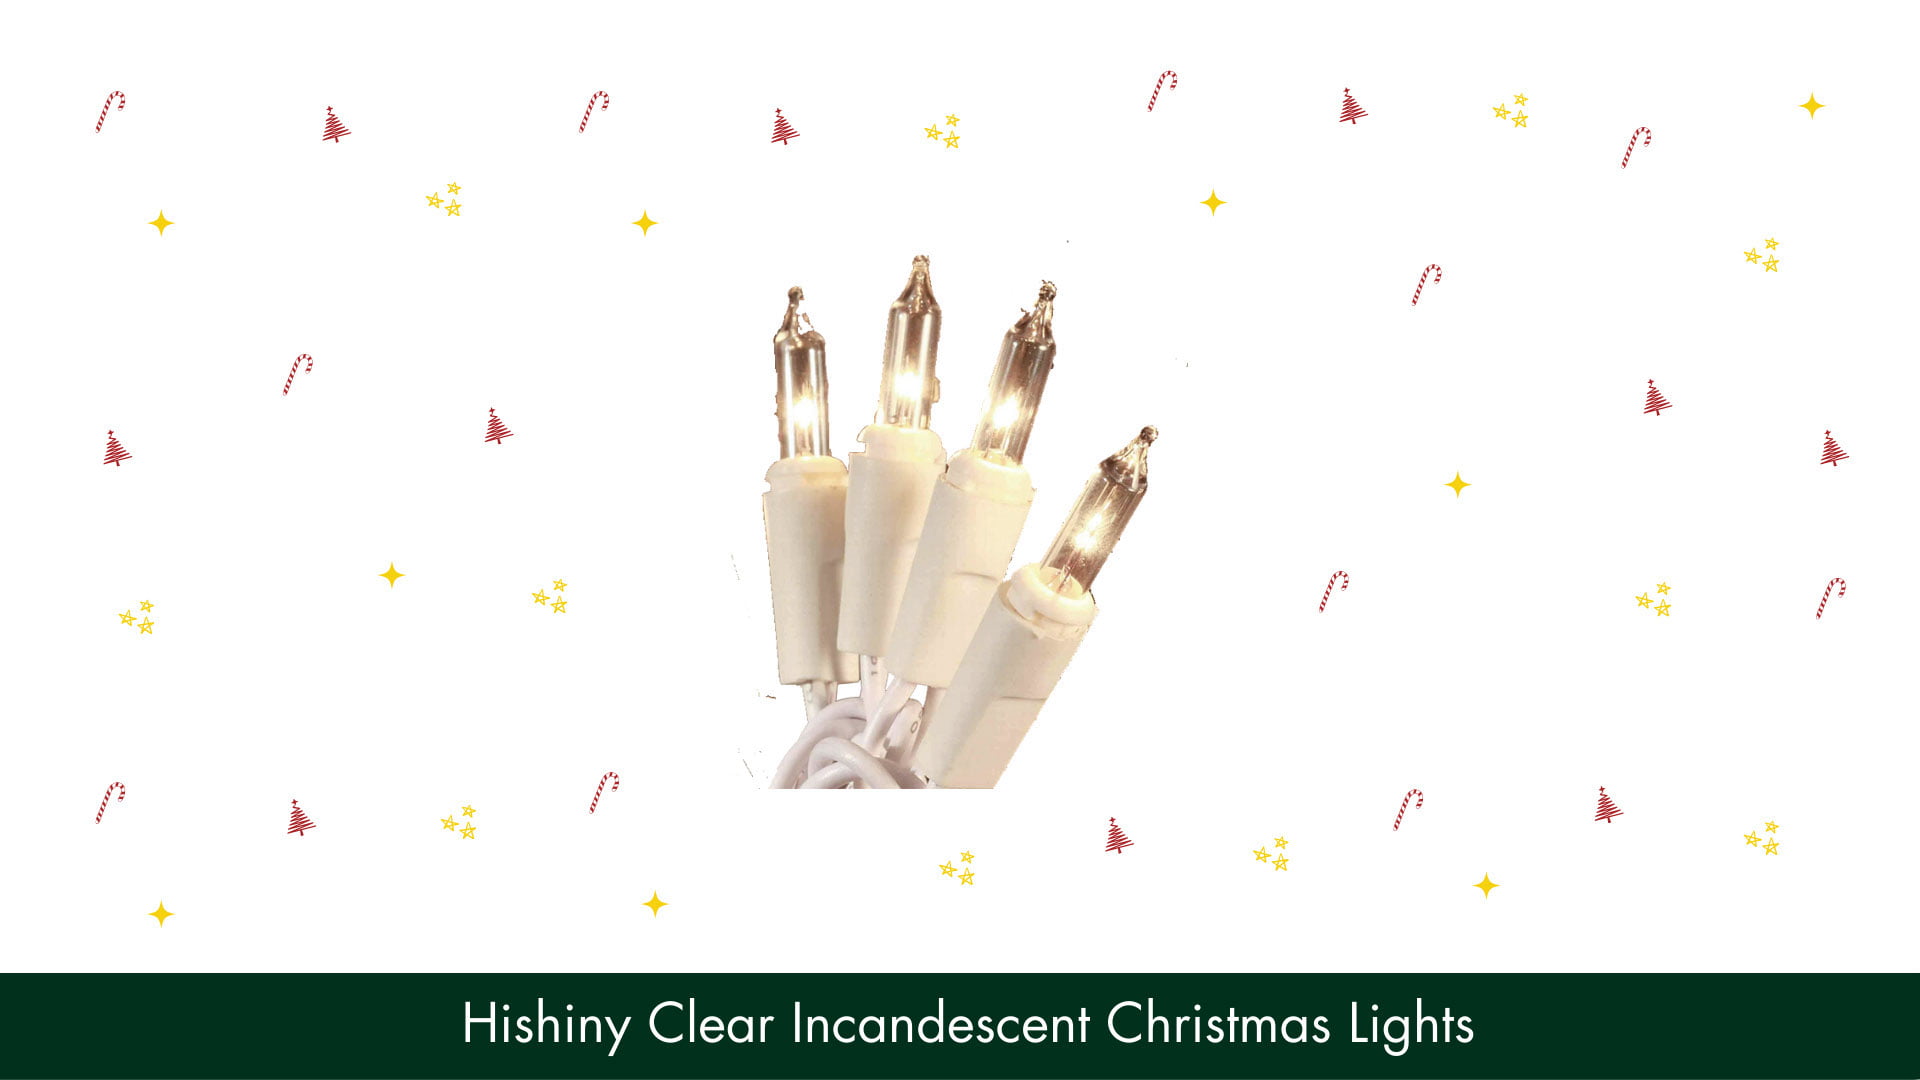 Hishiny Clear Incandescent Christmas Lights